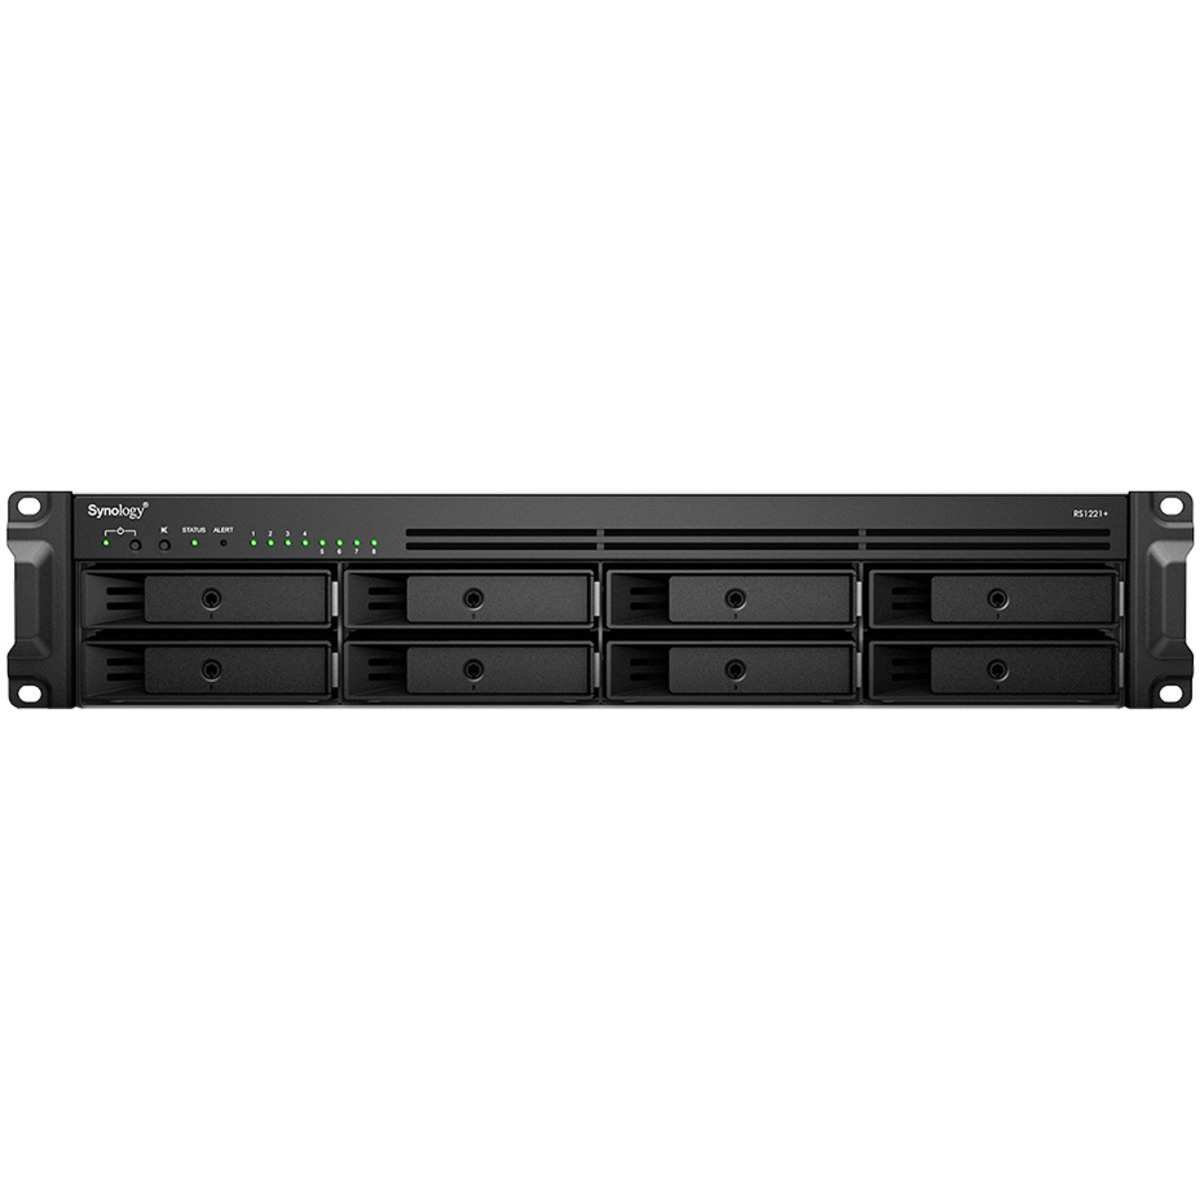 buy $3294 Synology RackStation RS1221RP+ 48tb RackMount NAS - Network Attached Storage Device 8x6000gb Western Digital Blue WD60EZAZ 3.5 5400rpm SATA 6Gb/s HDD CONSUMER Class Drives Installed - Burn-In Tested - nas headquarters buy network attached storage server device das new raid-5 free shipping usa christmas new year holiday sale RackStation RS1221RP+